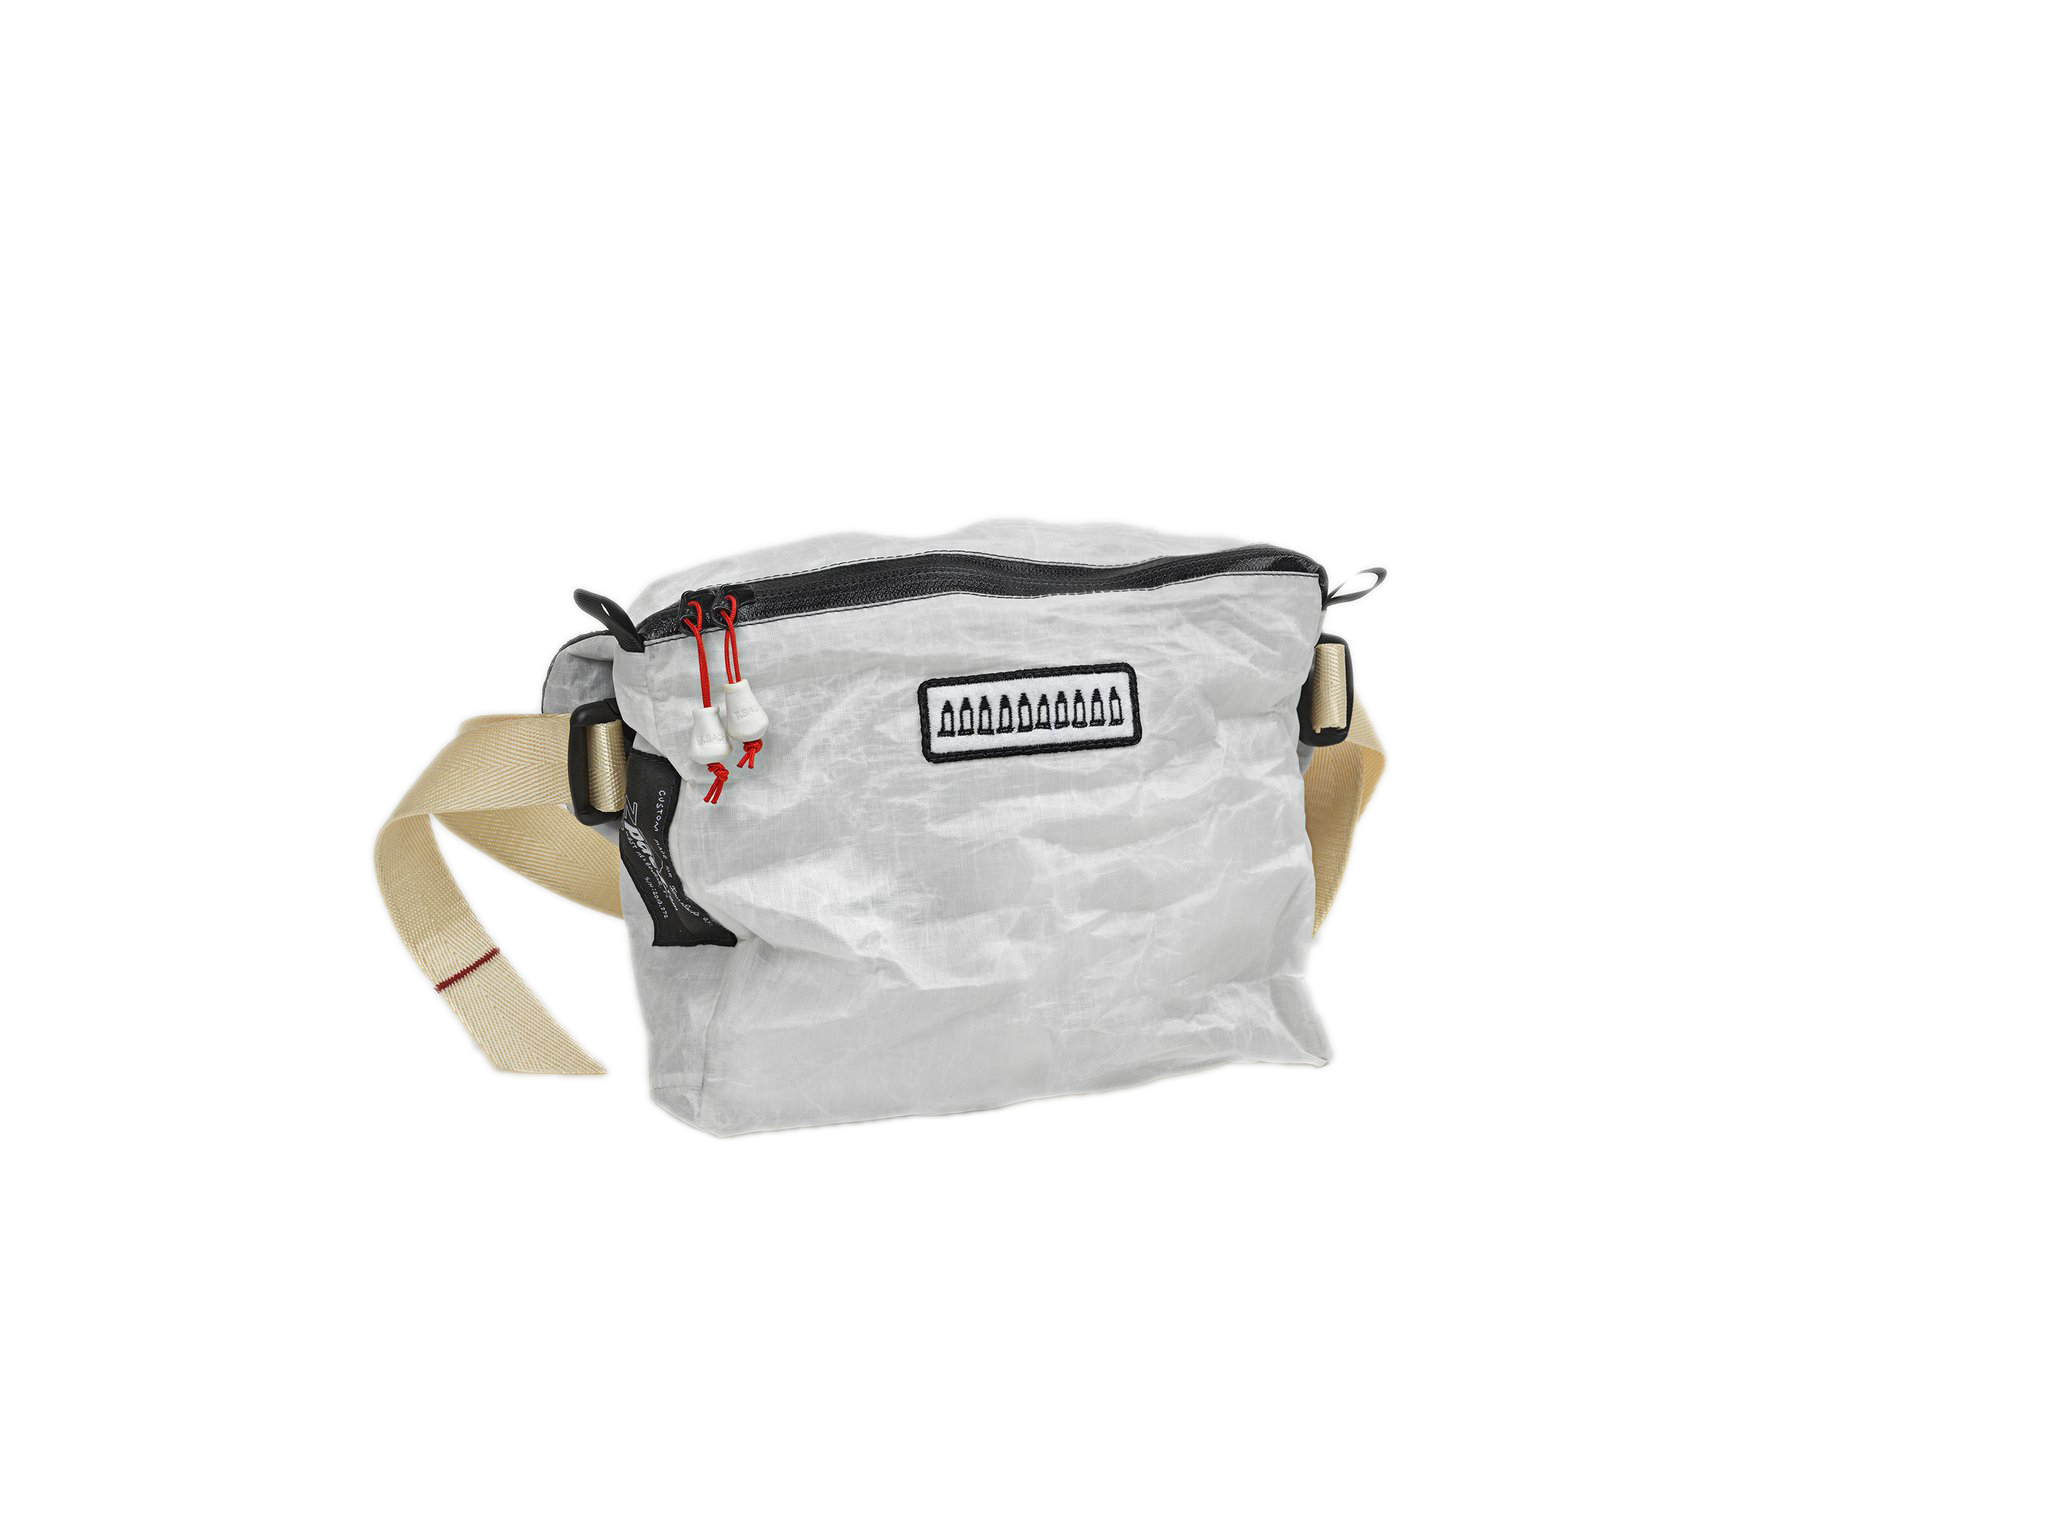 Tom Sachs Second Edition Fanny Pack Olive Drab